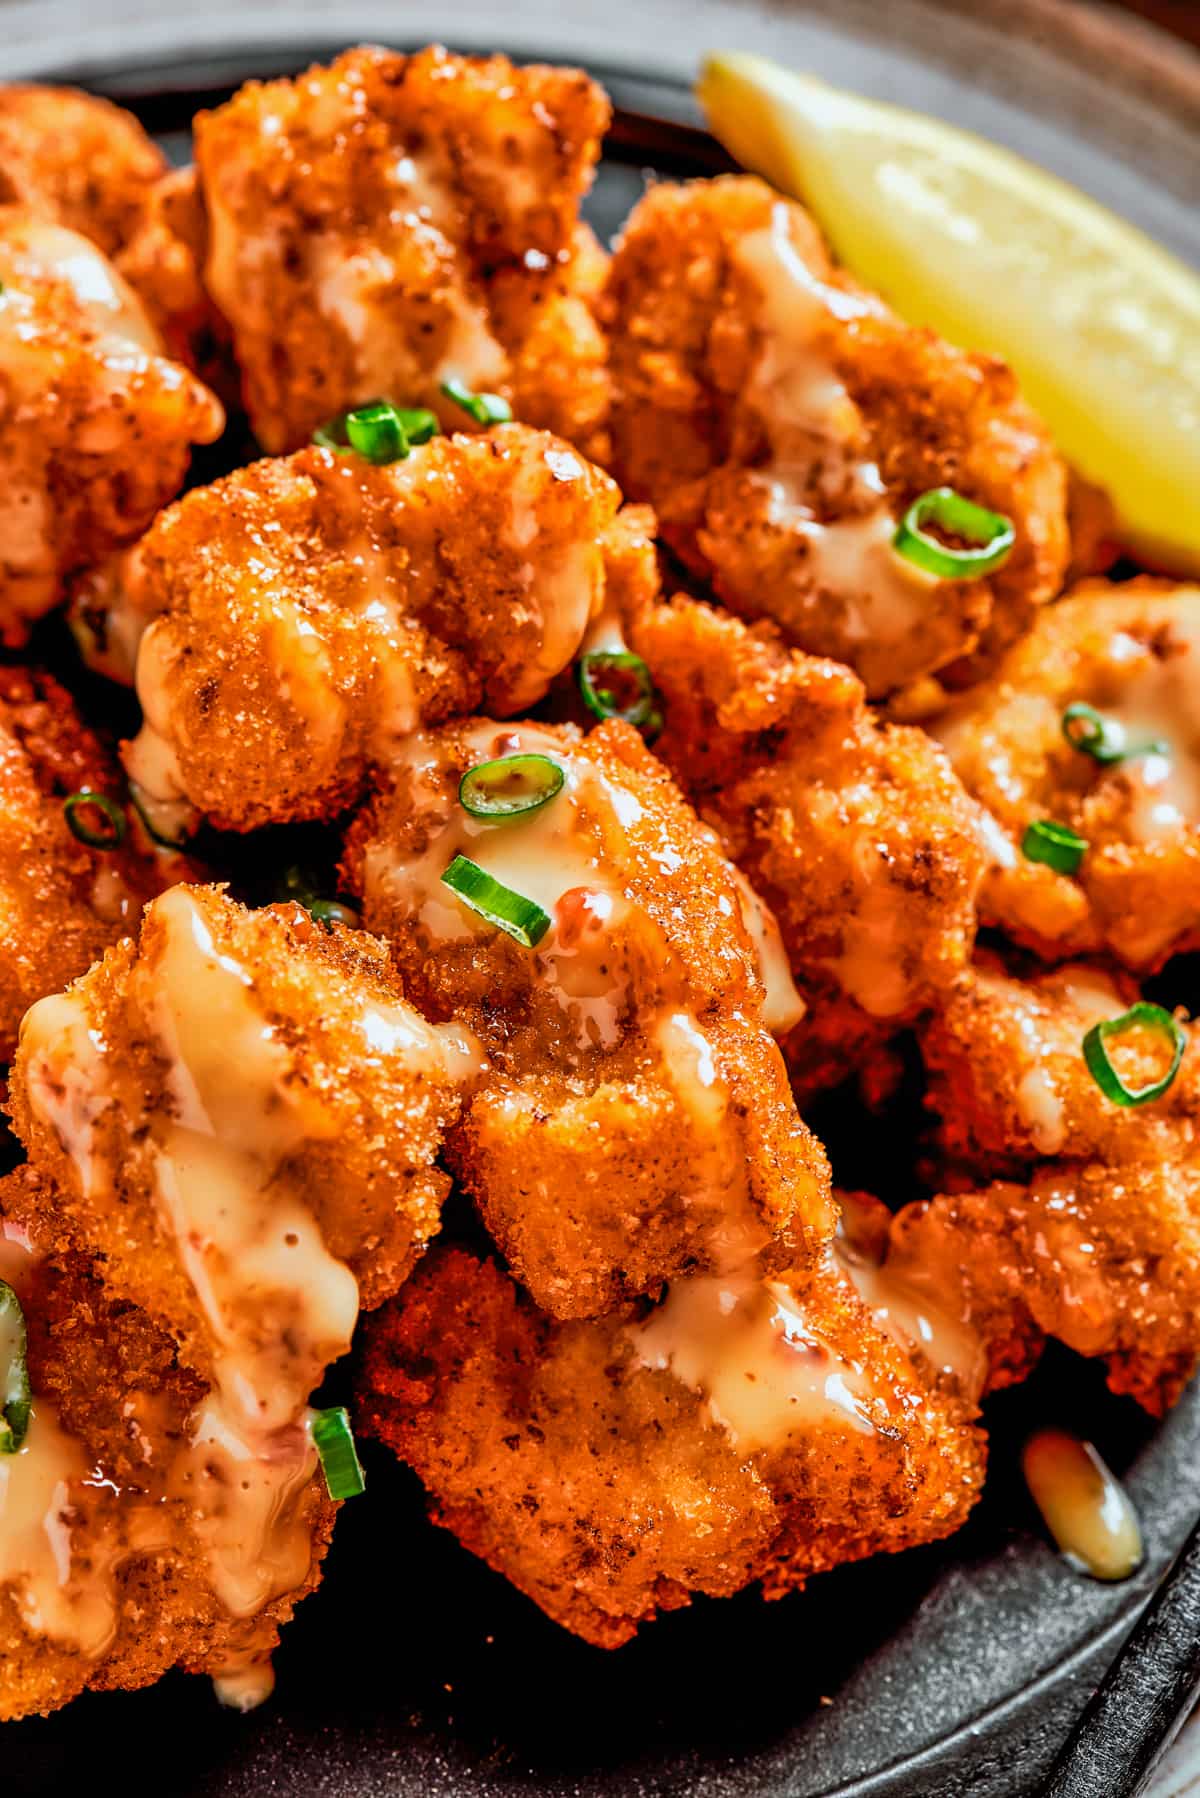 Close-up image of bang bang chicken drizzled with chili mayo sauce and green onions on top.